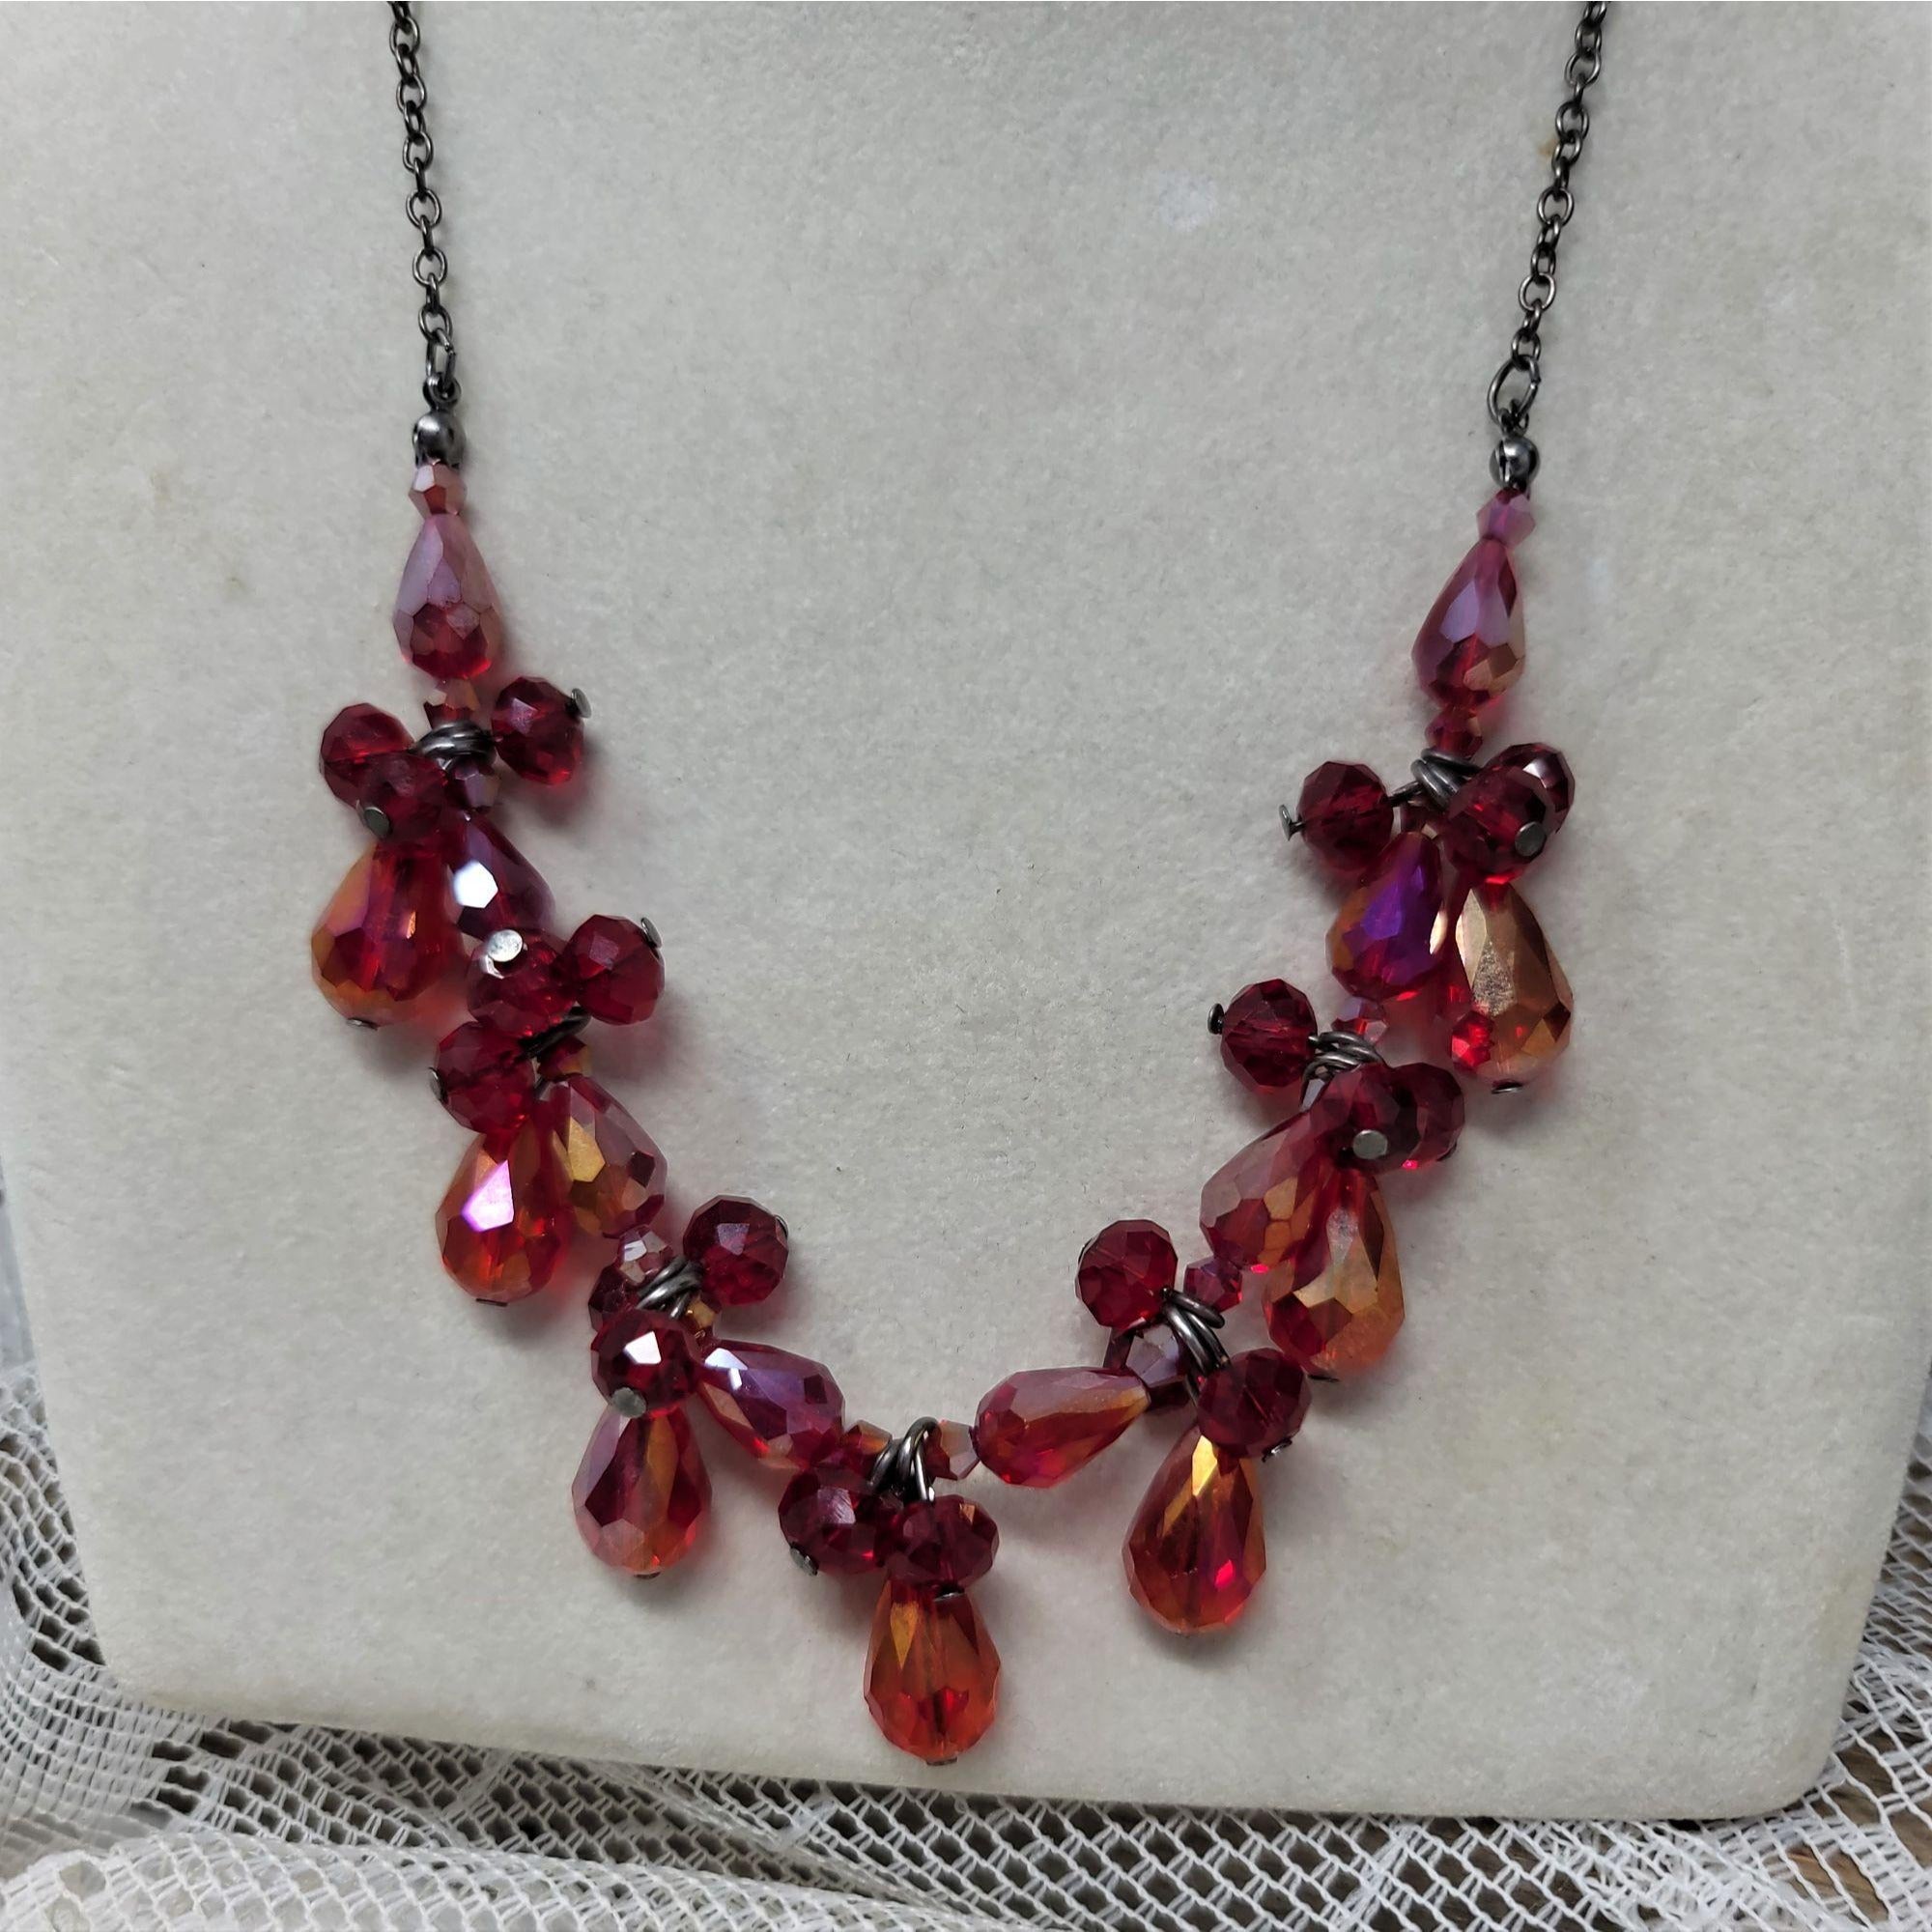 Sparkling Red Beaded Tear Drop Necklace Choker 16 Inch